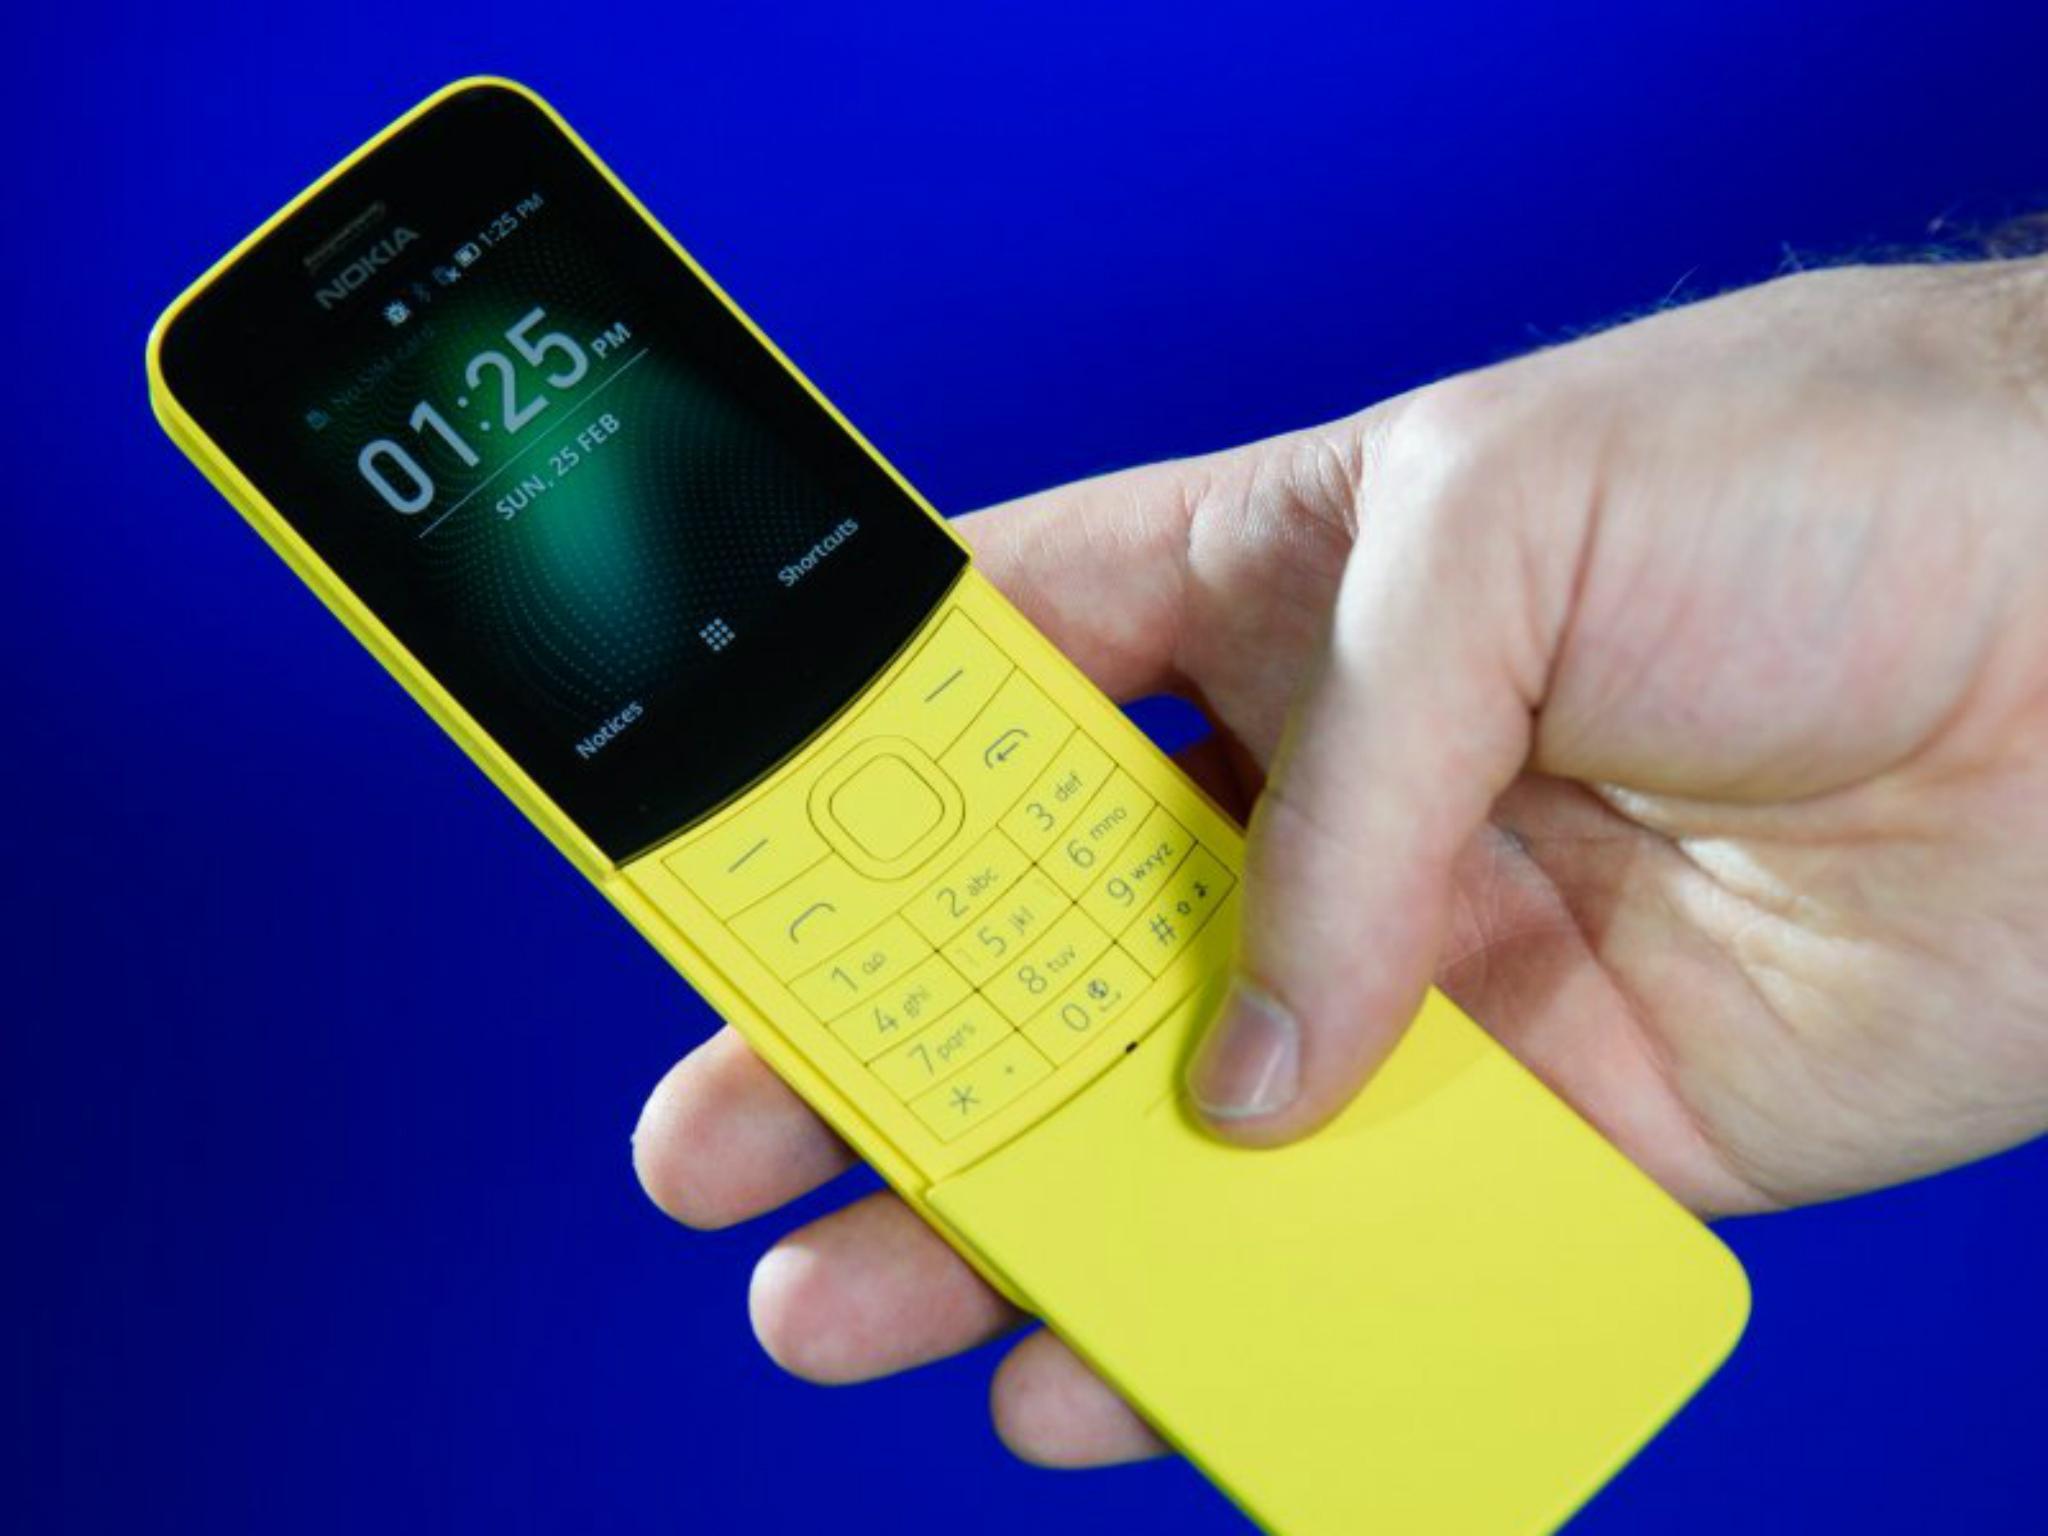 Nokia 8110 4G First Review: The Matrix Phone Reloaded Is Top Banana